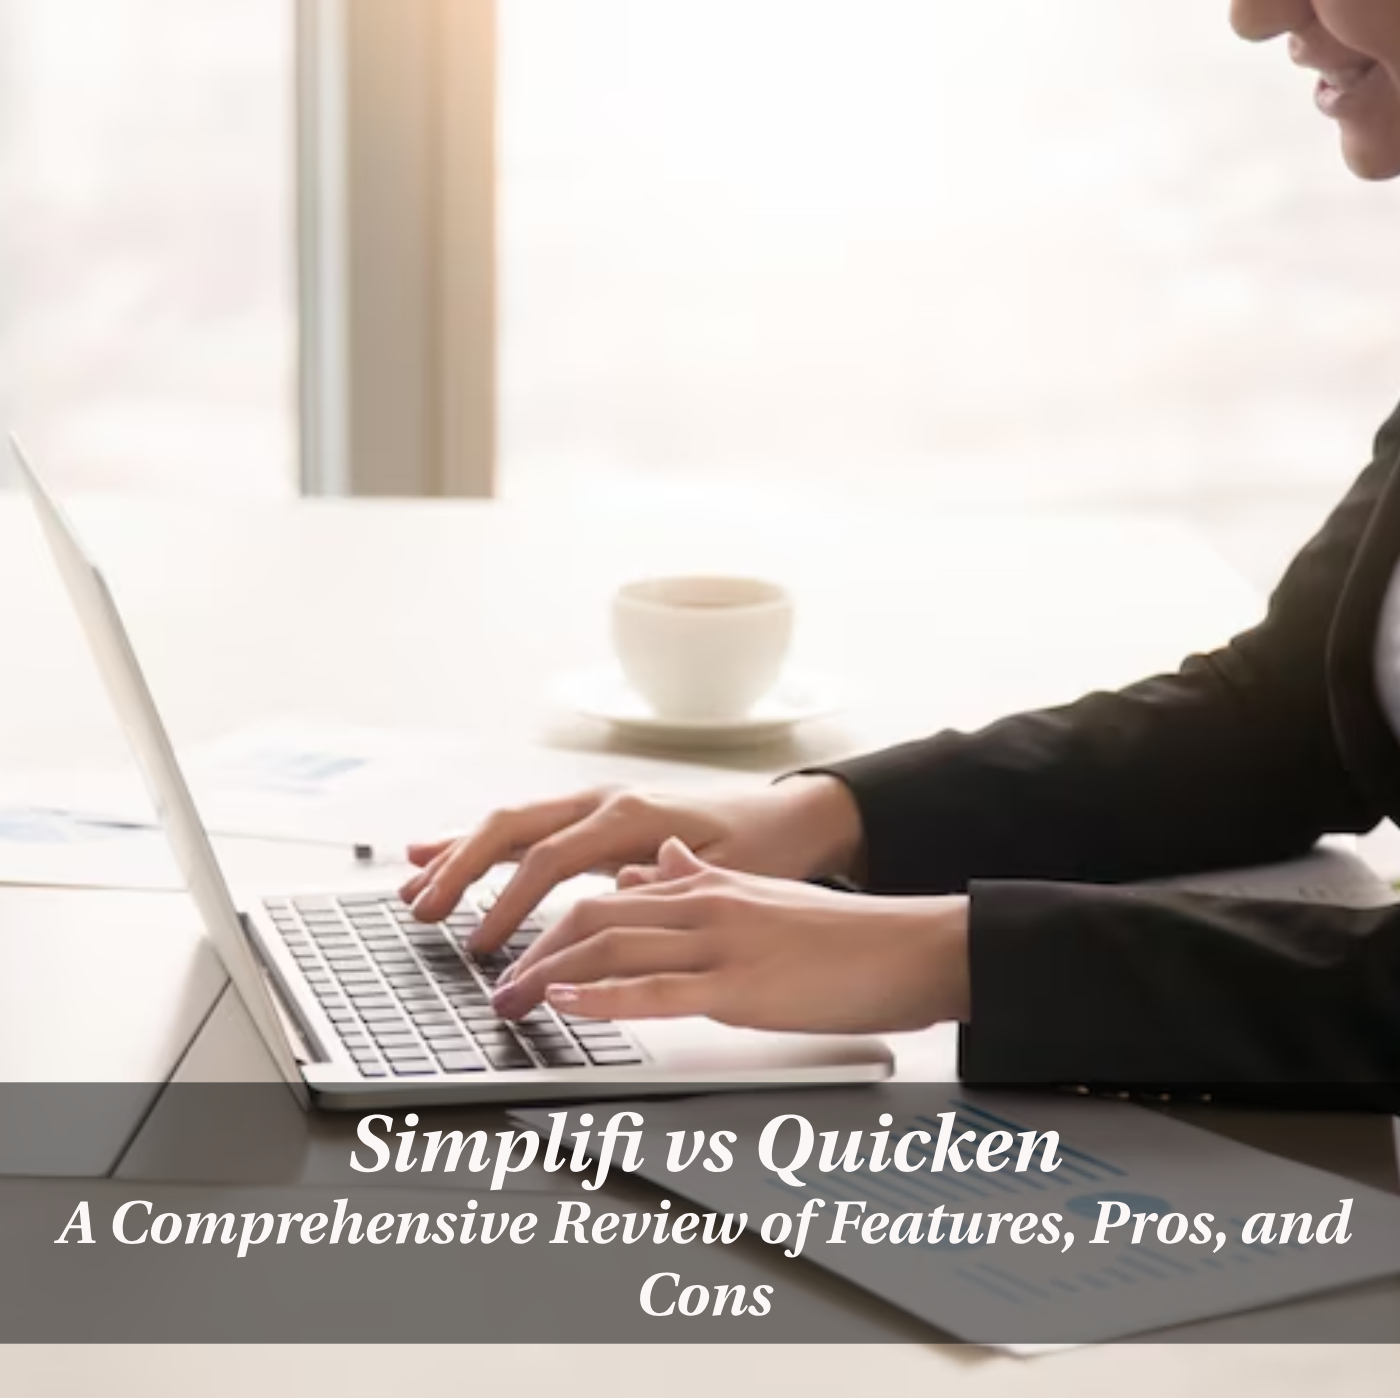 Simplifi vs Quicken: A Comprehensive Review of Features, Pros, and Cons